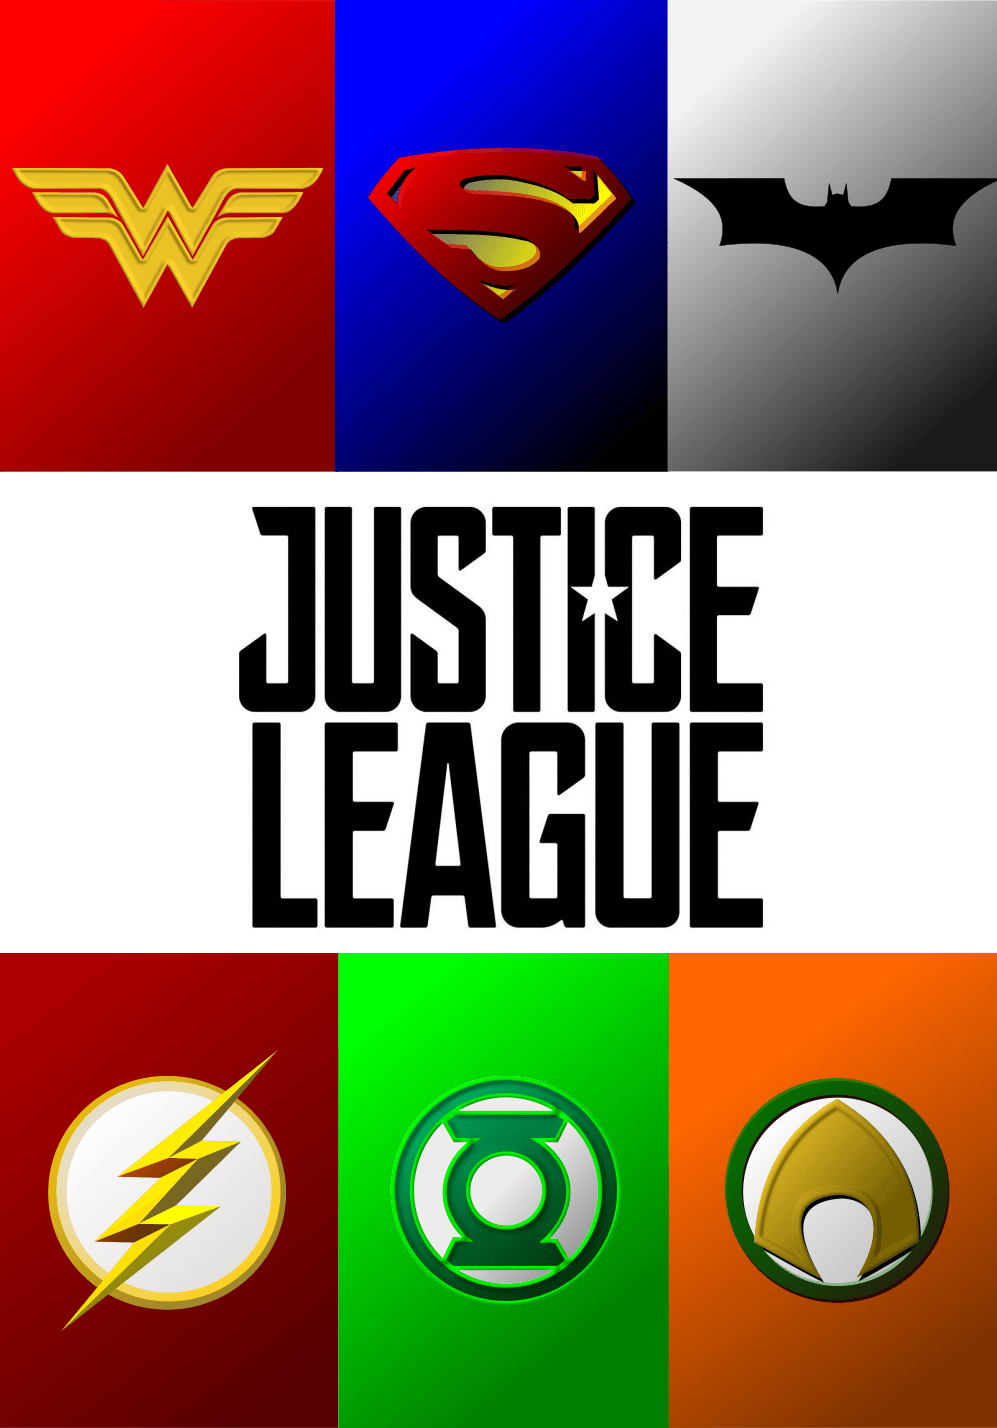 Justice League Logo - Justice League logos (made with Inkscape) - Album on Imgur